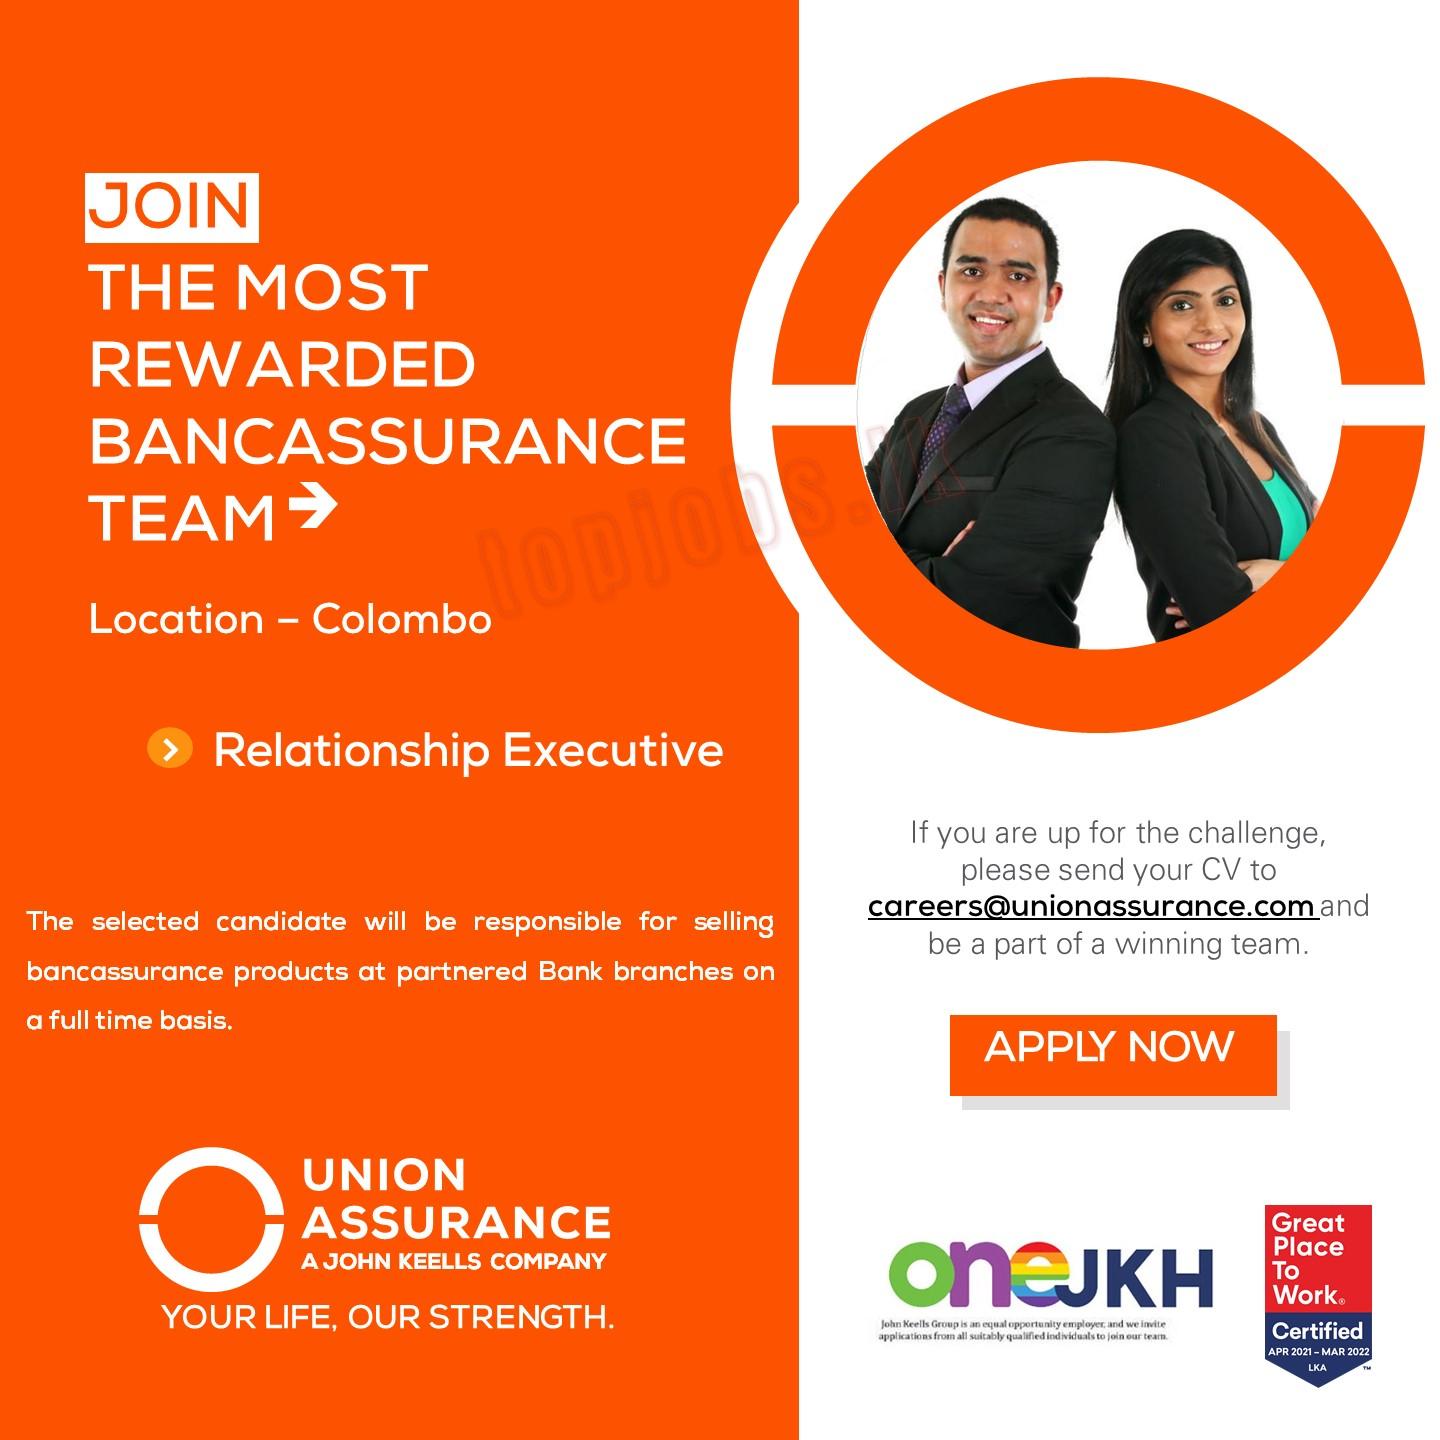 Relationship Executive of Bancassurance Vacancy in Union Assurance